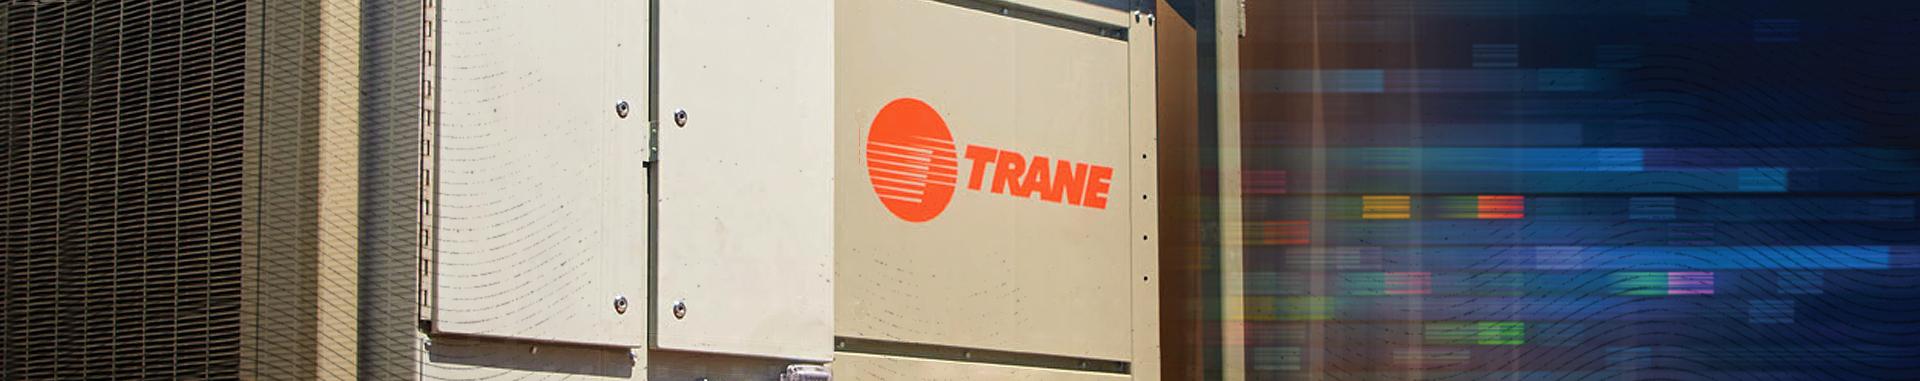 Four-color image of Trane equipment at left fades into primarily blue, yet multi-colored design at right based on Trane logo